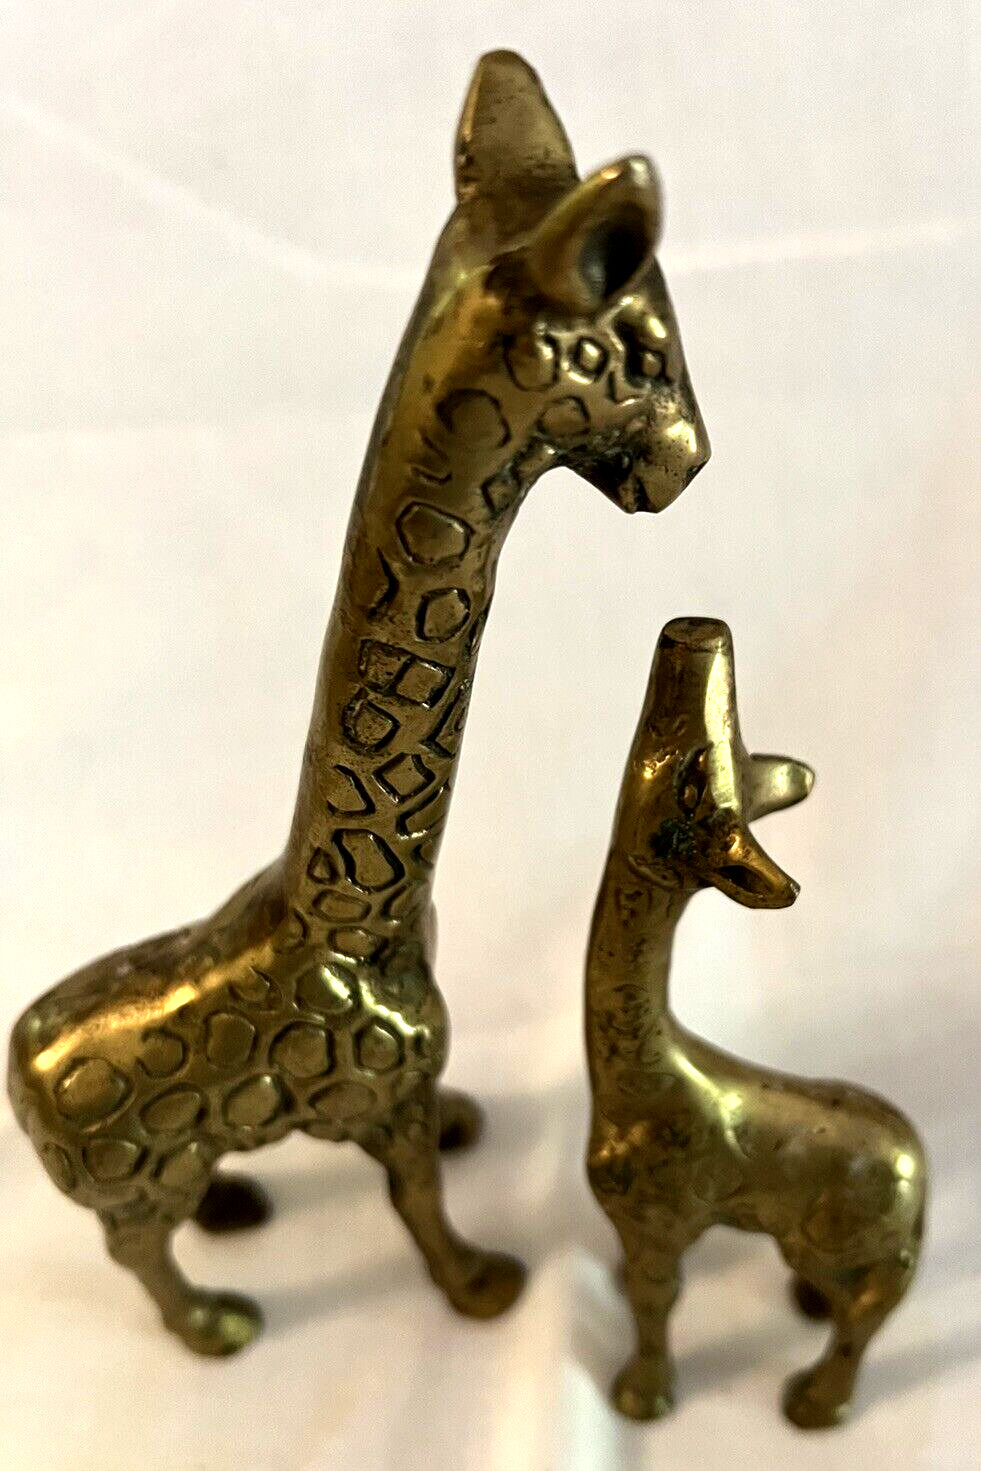 Vintage Mid-Century Solid Brass Mother and Baby Giraffe Figurines Sculpture